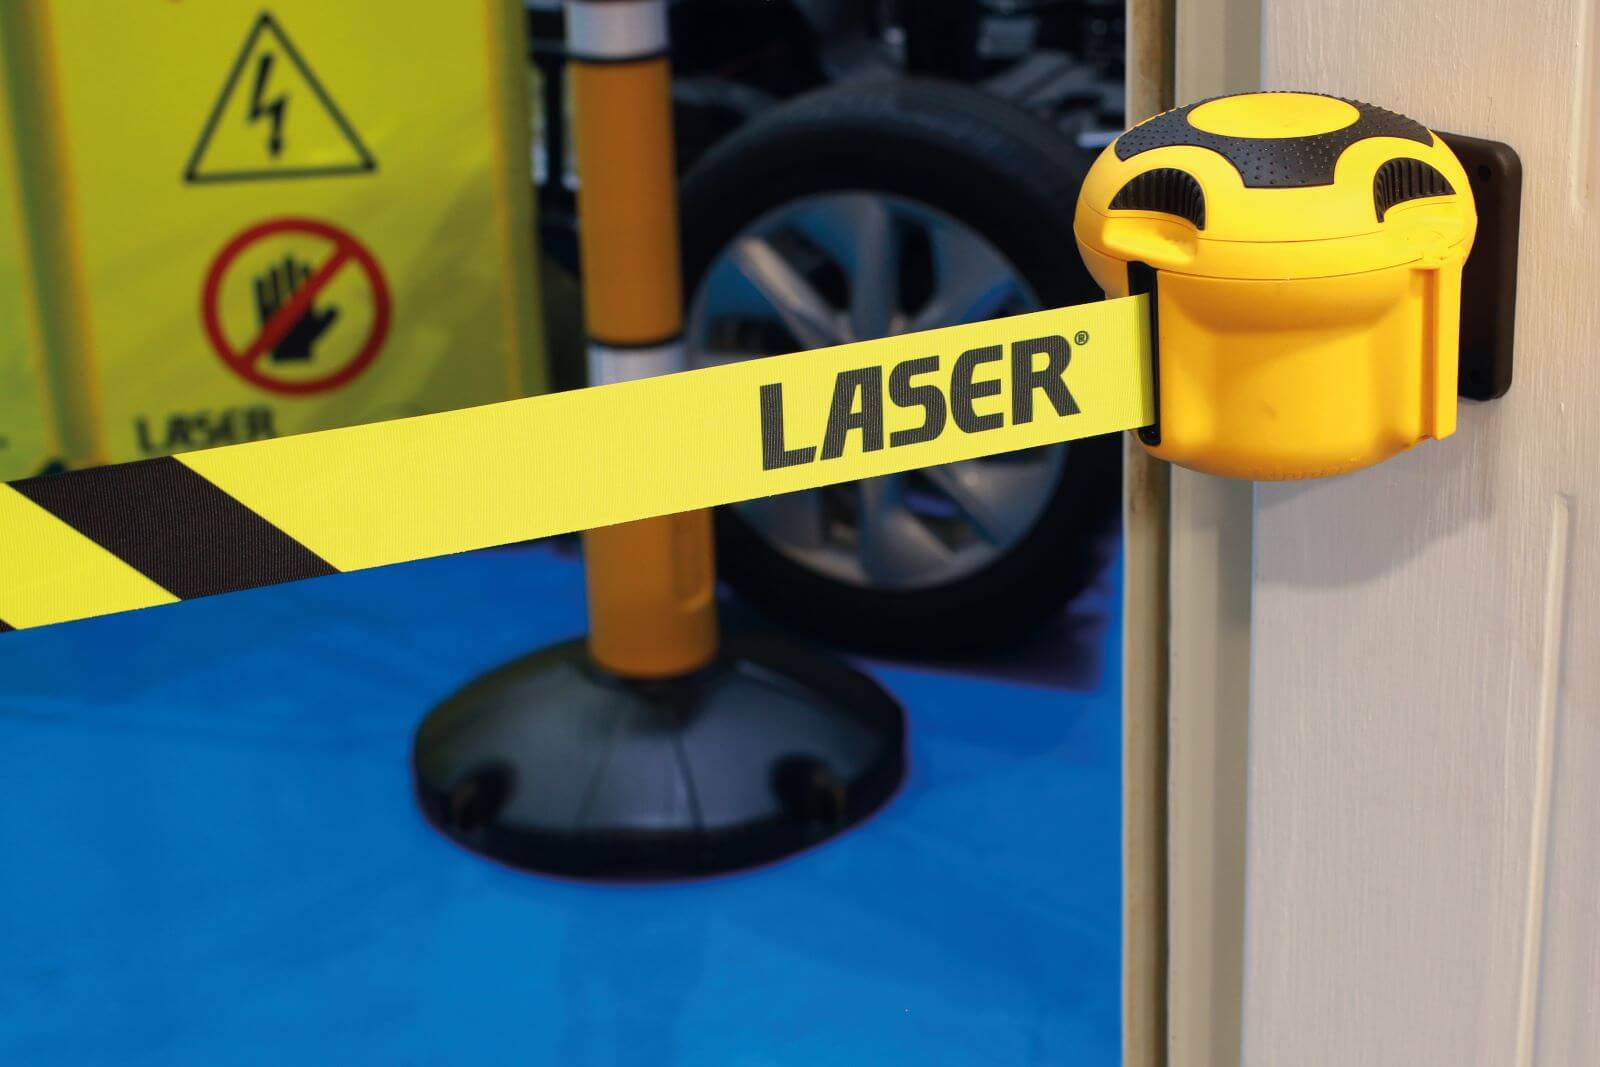 Specialist safety barriers are essential for certain workshop set-ups